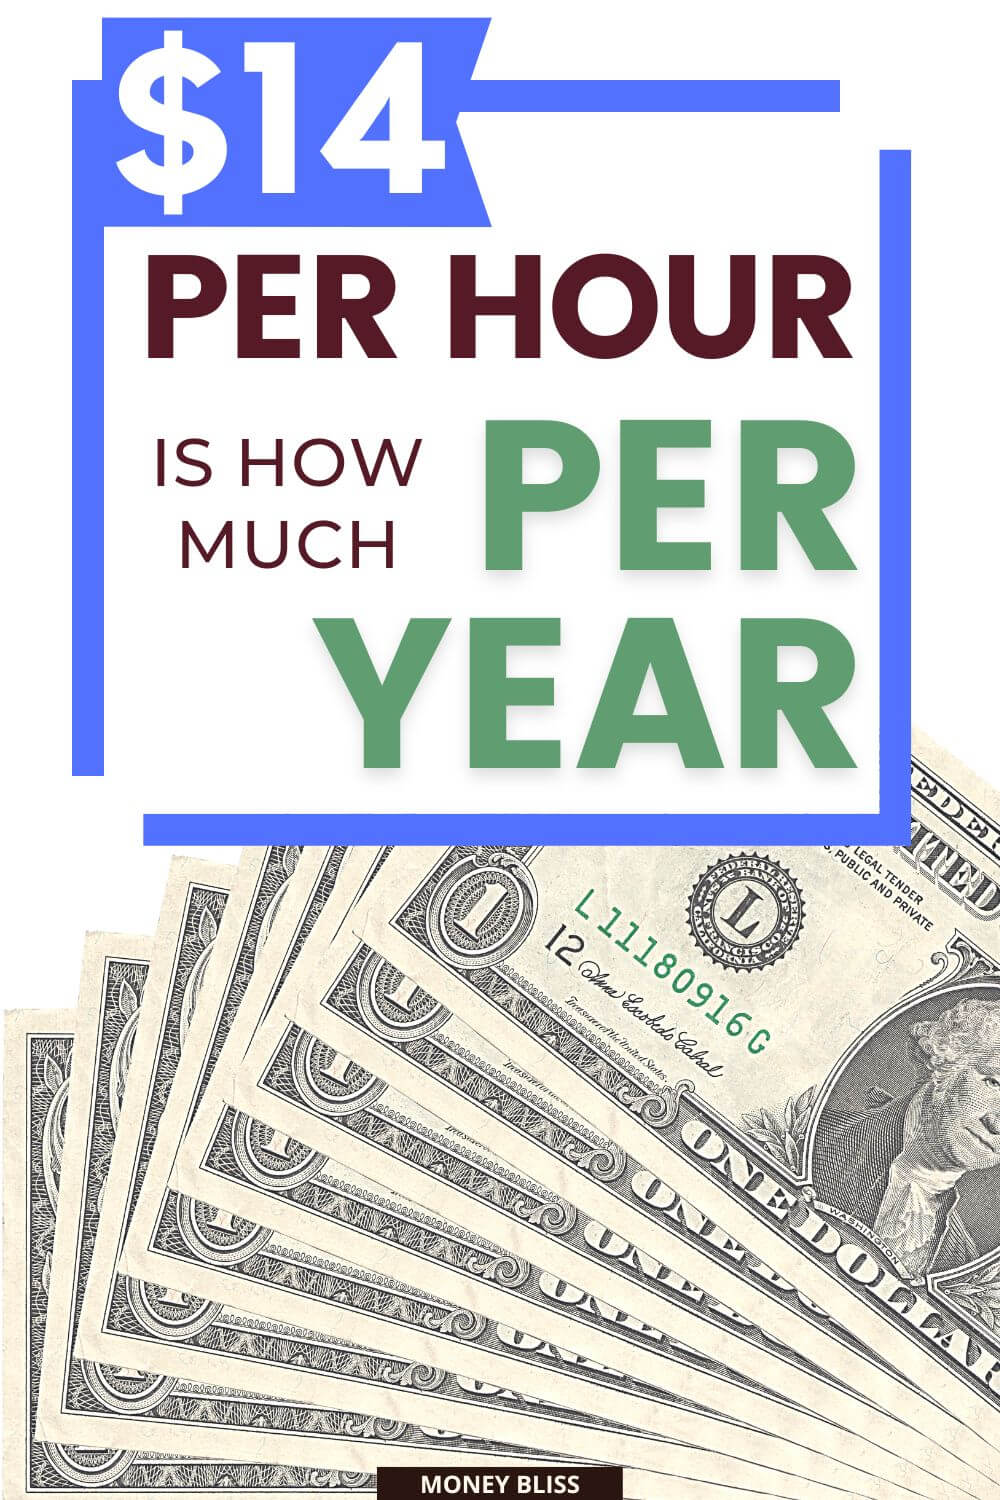 Learn what living near minimum wage is like. Find out what 14 an hour is how much a year, month, and day. Plus tips on how to make more money! Is $14 an hour good? Learn what 14 an hour is how much a year, month, and day. Plus tips on how to live on 14 dollars an hour!